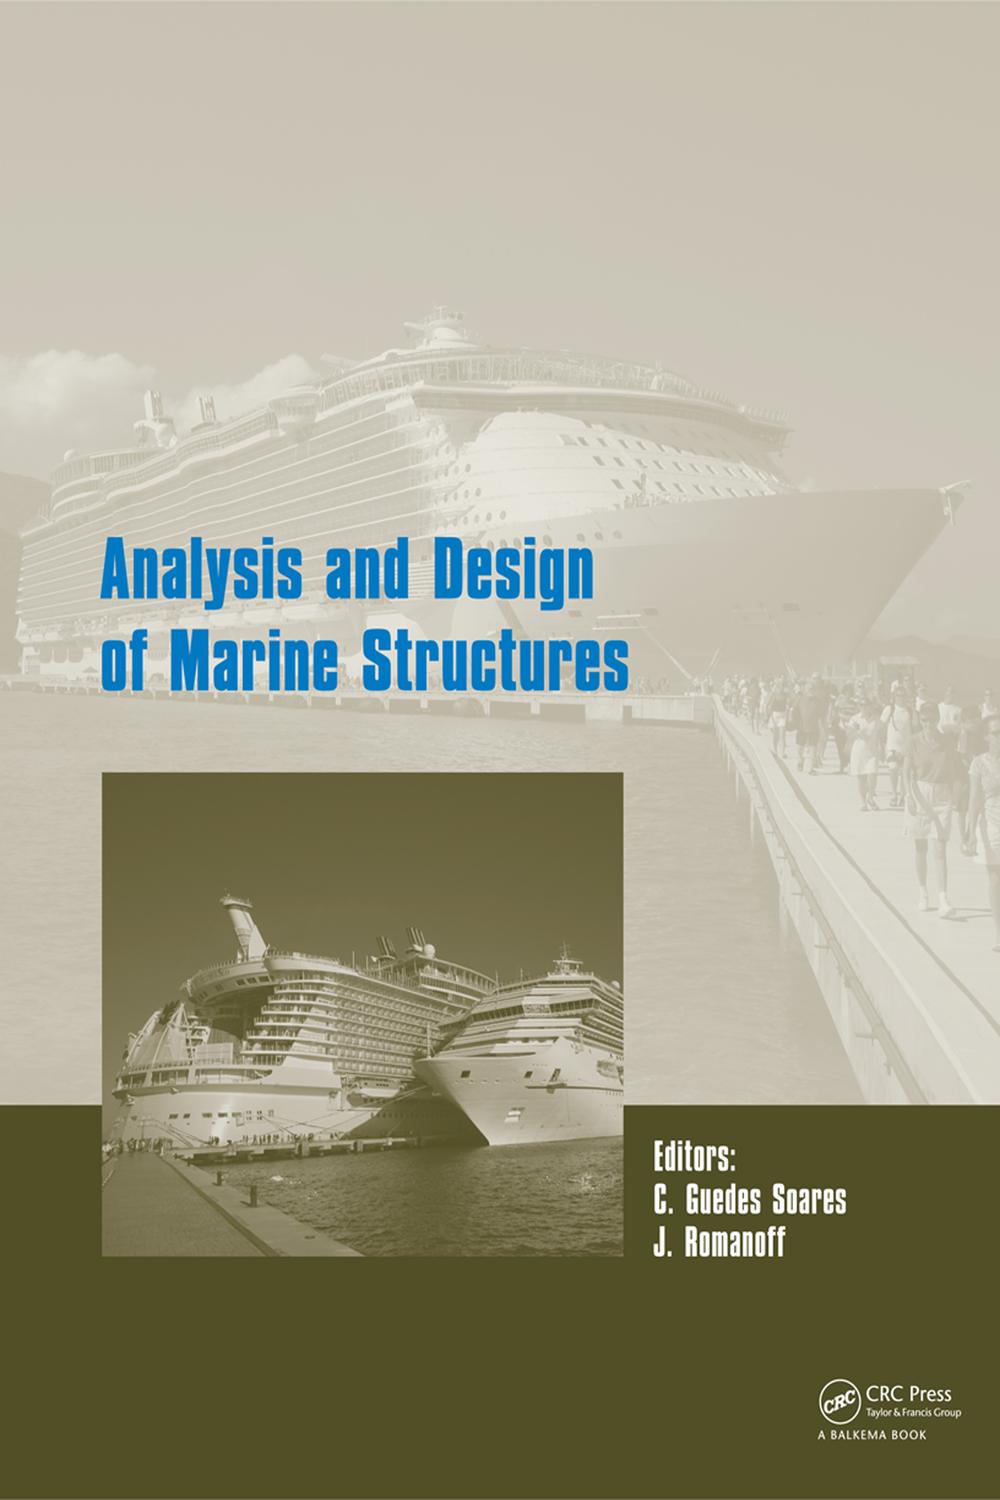 Analysis and Design of Marine Structures - Jani Romanoff, Carlos Guedes Soares